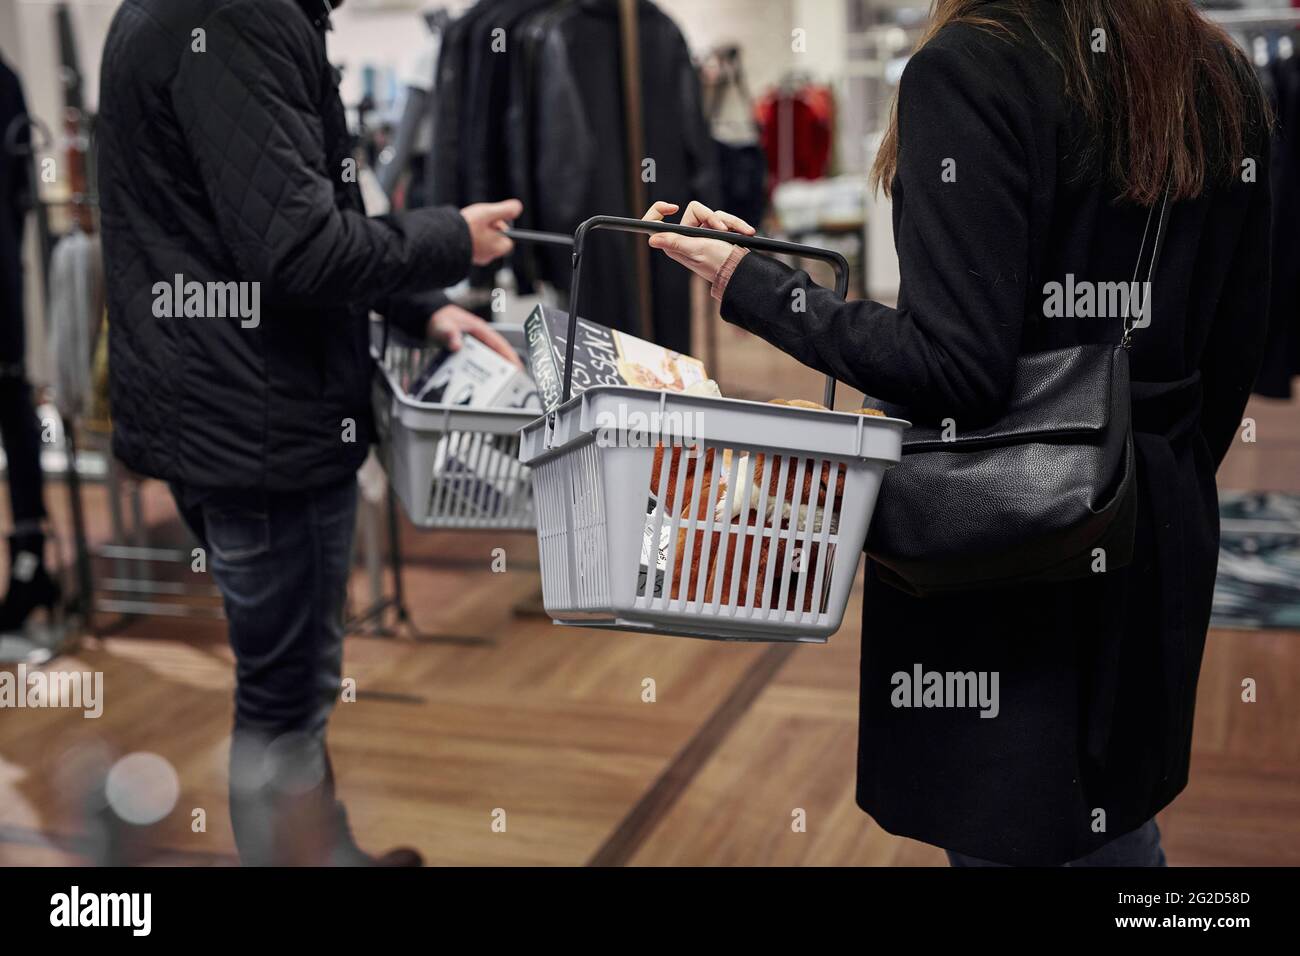 Man and woman with shopping baskets Stock Photo